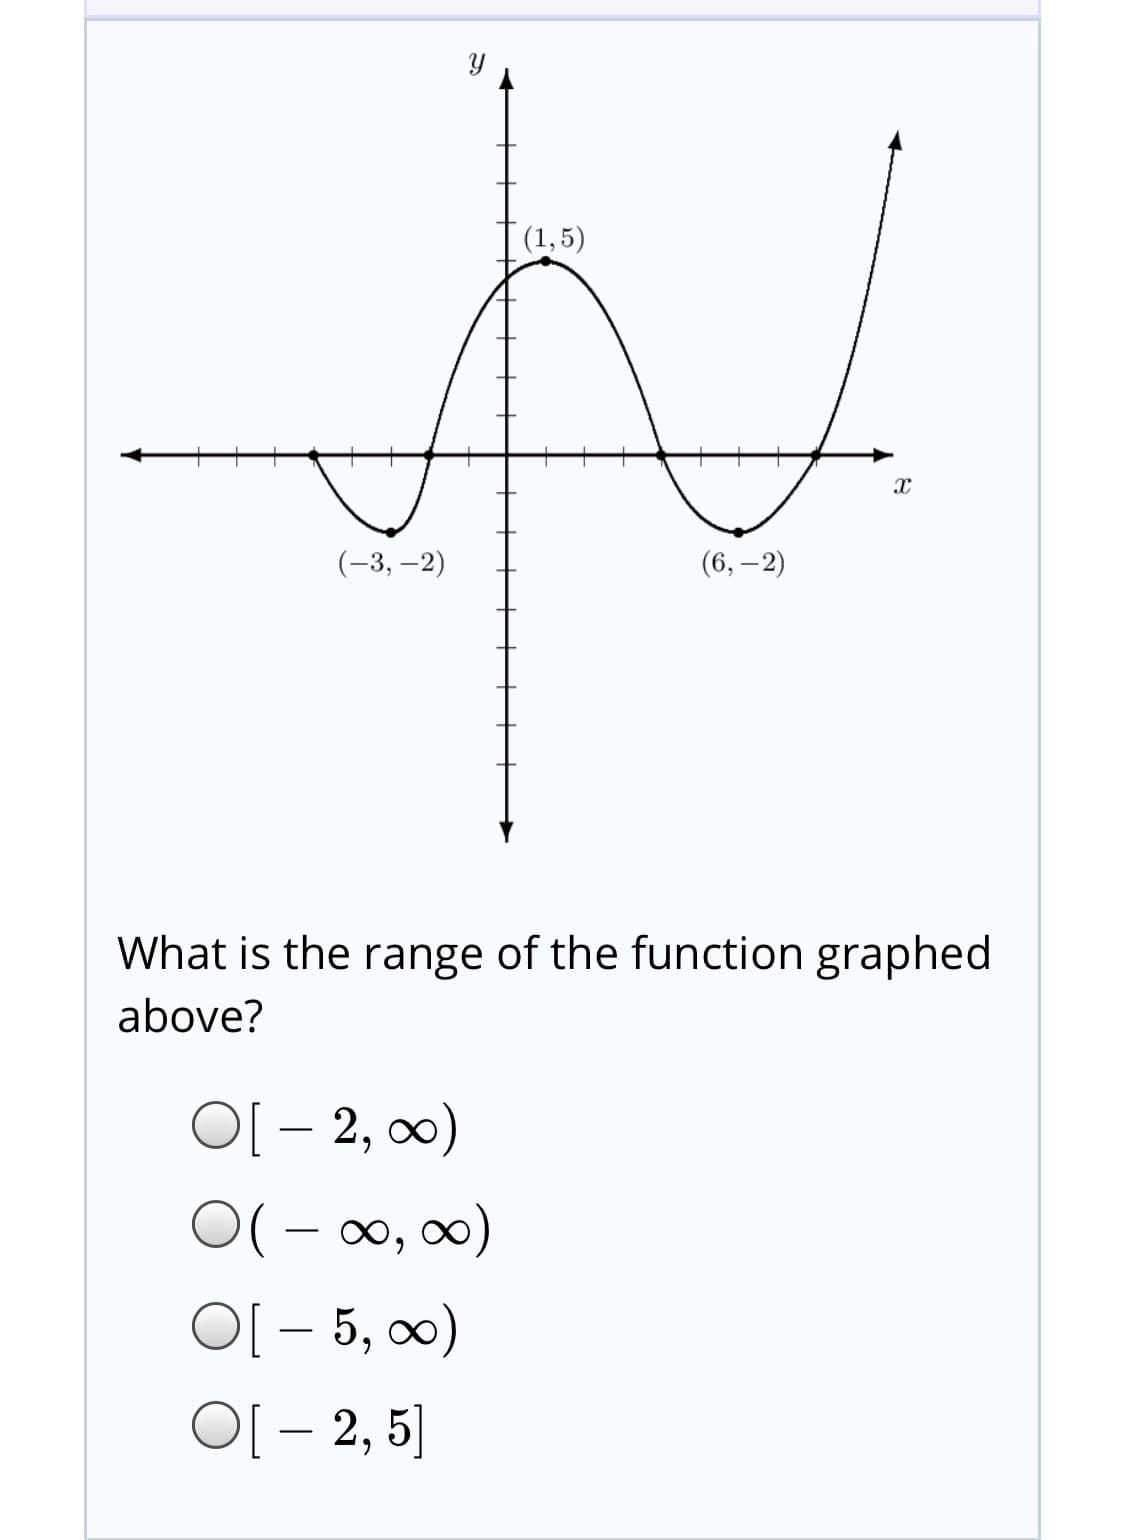 (1,5)
(-3, –2)
(6, –2)
What is the range of the function graphed
above?
O[ – 2, 0)
O(- 0, 0)
O[ - 5, 0)
O[ – 2, 5]
